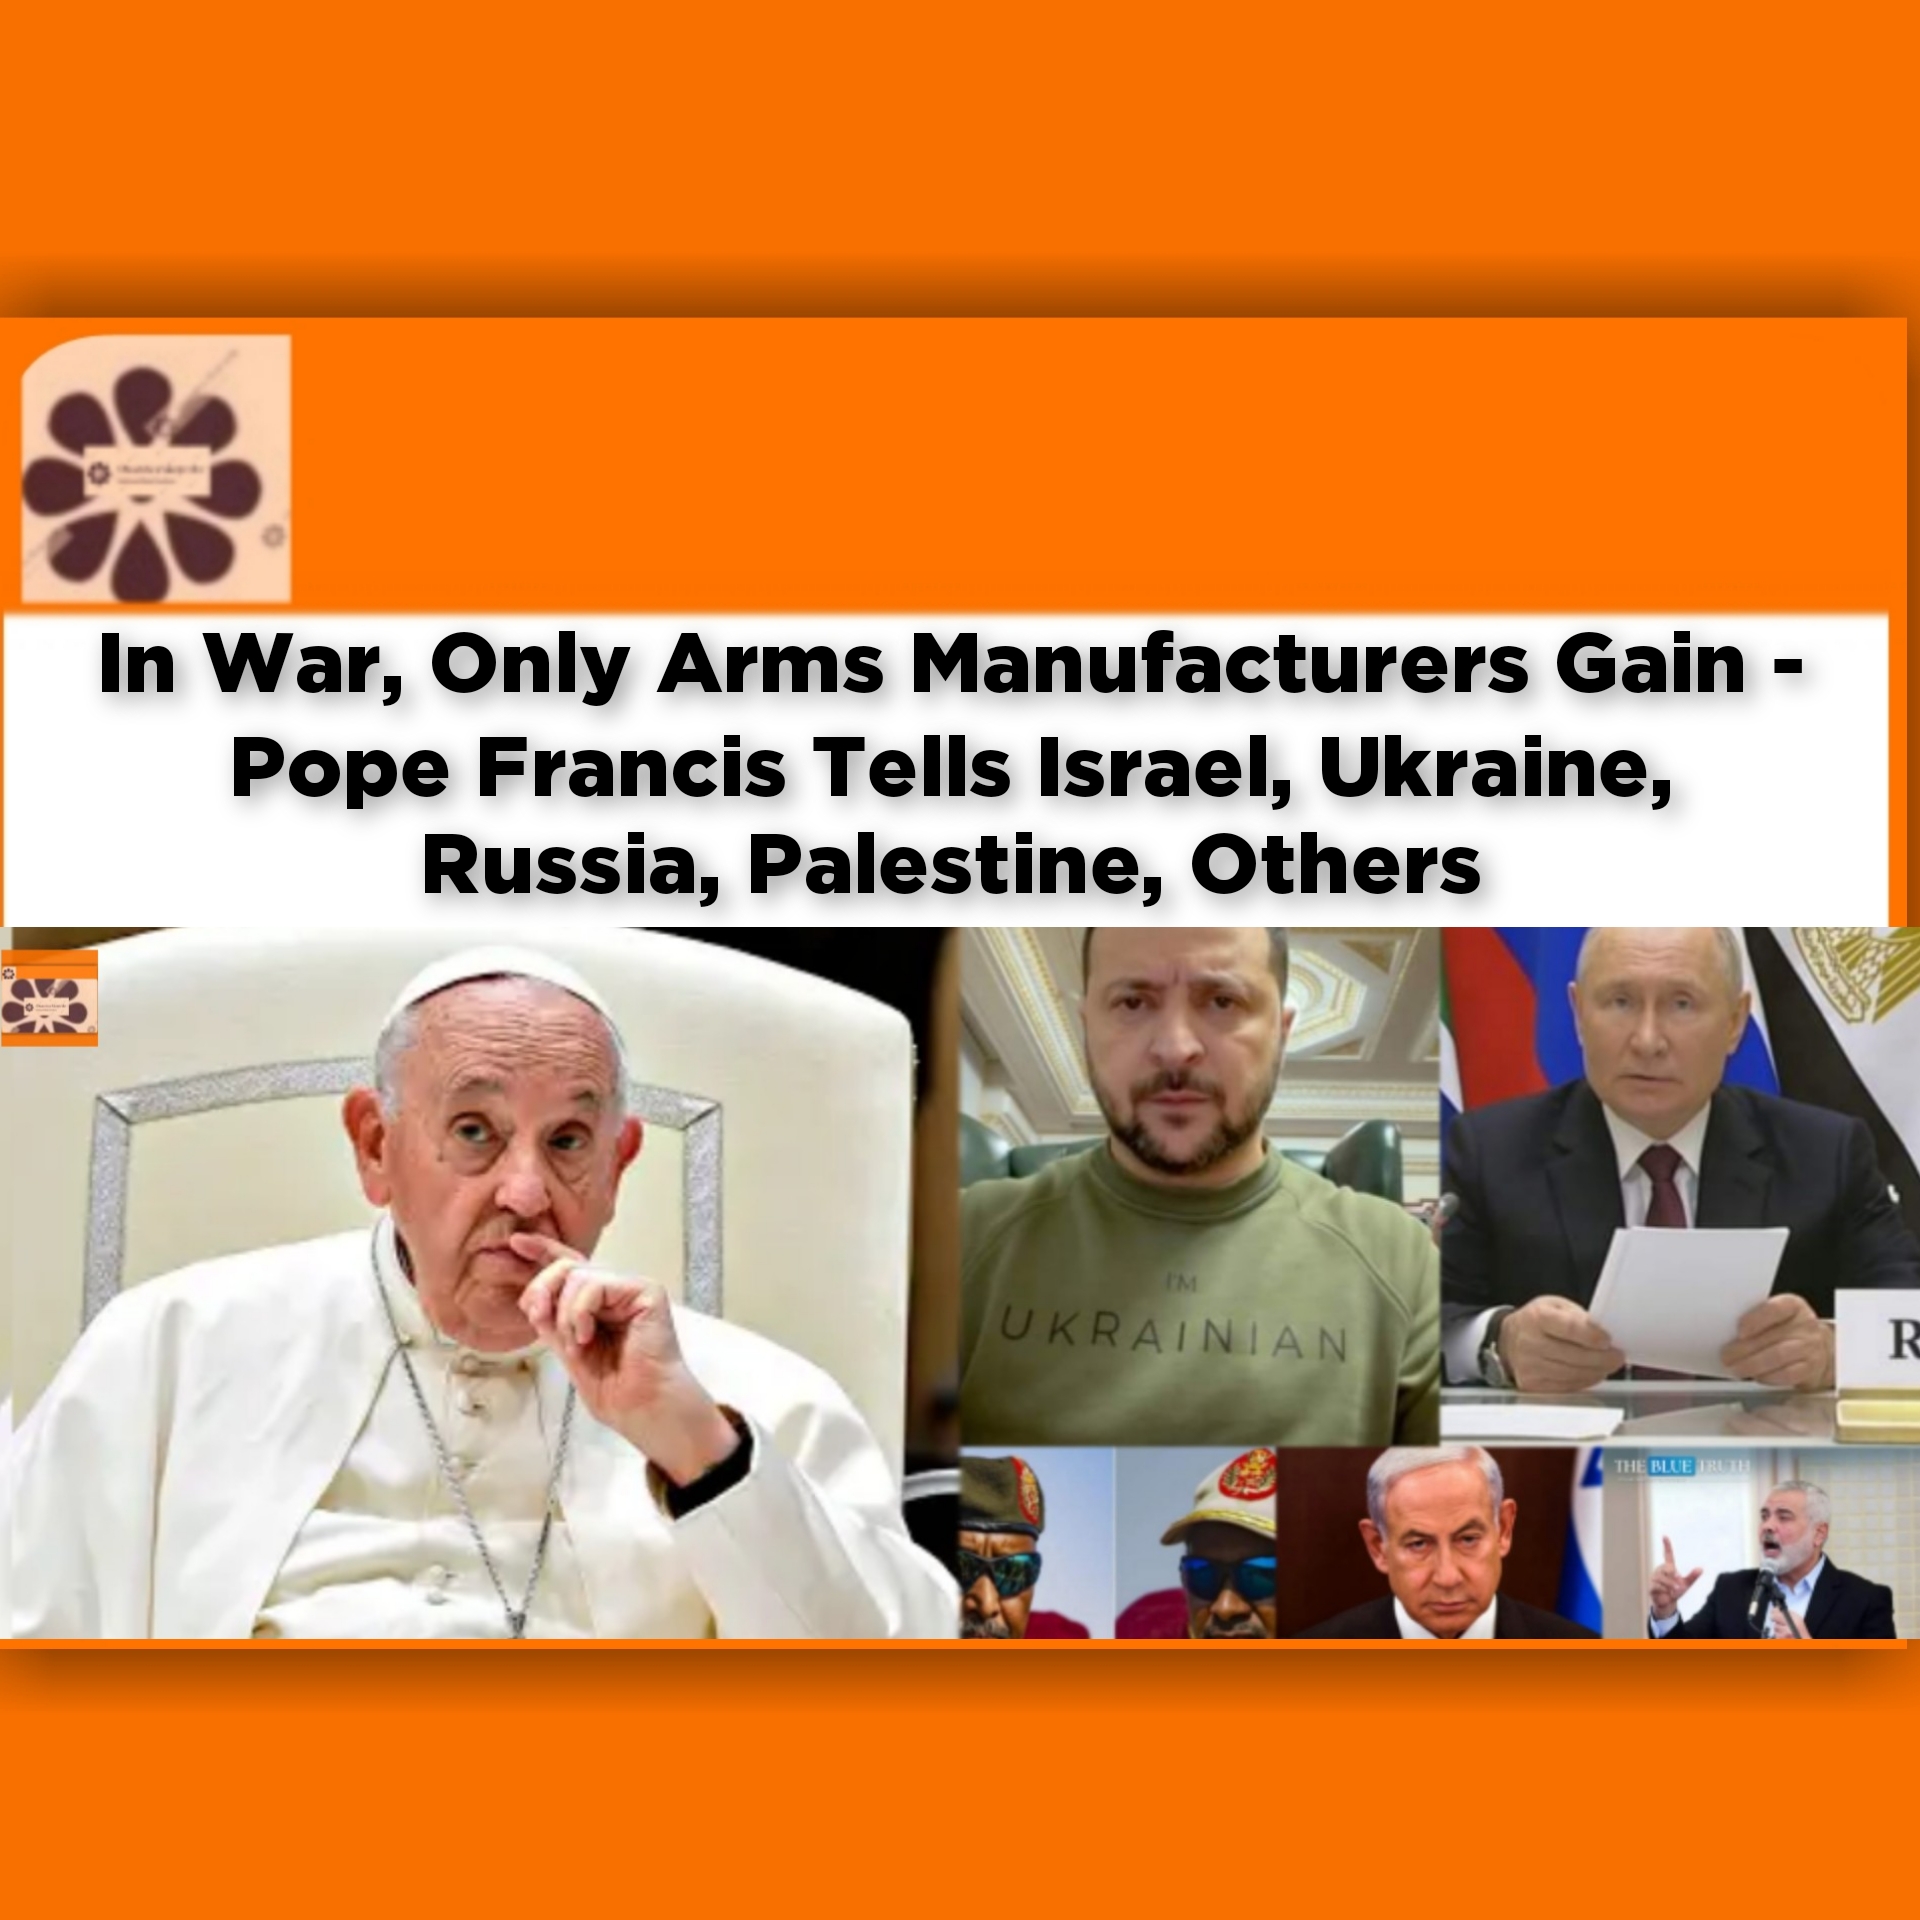 In War, Only Arms Manufacturers Gain - Pope Francis Tells Israel, Ukraine, Russia, Palestine, Others ~ OsazuwaAkonedo ###LP